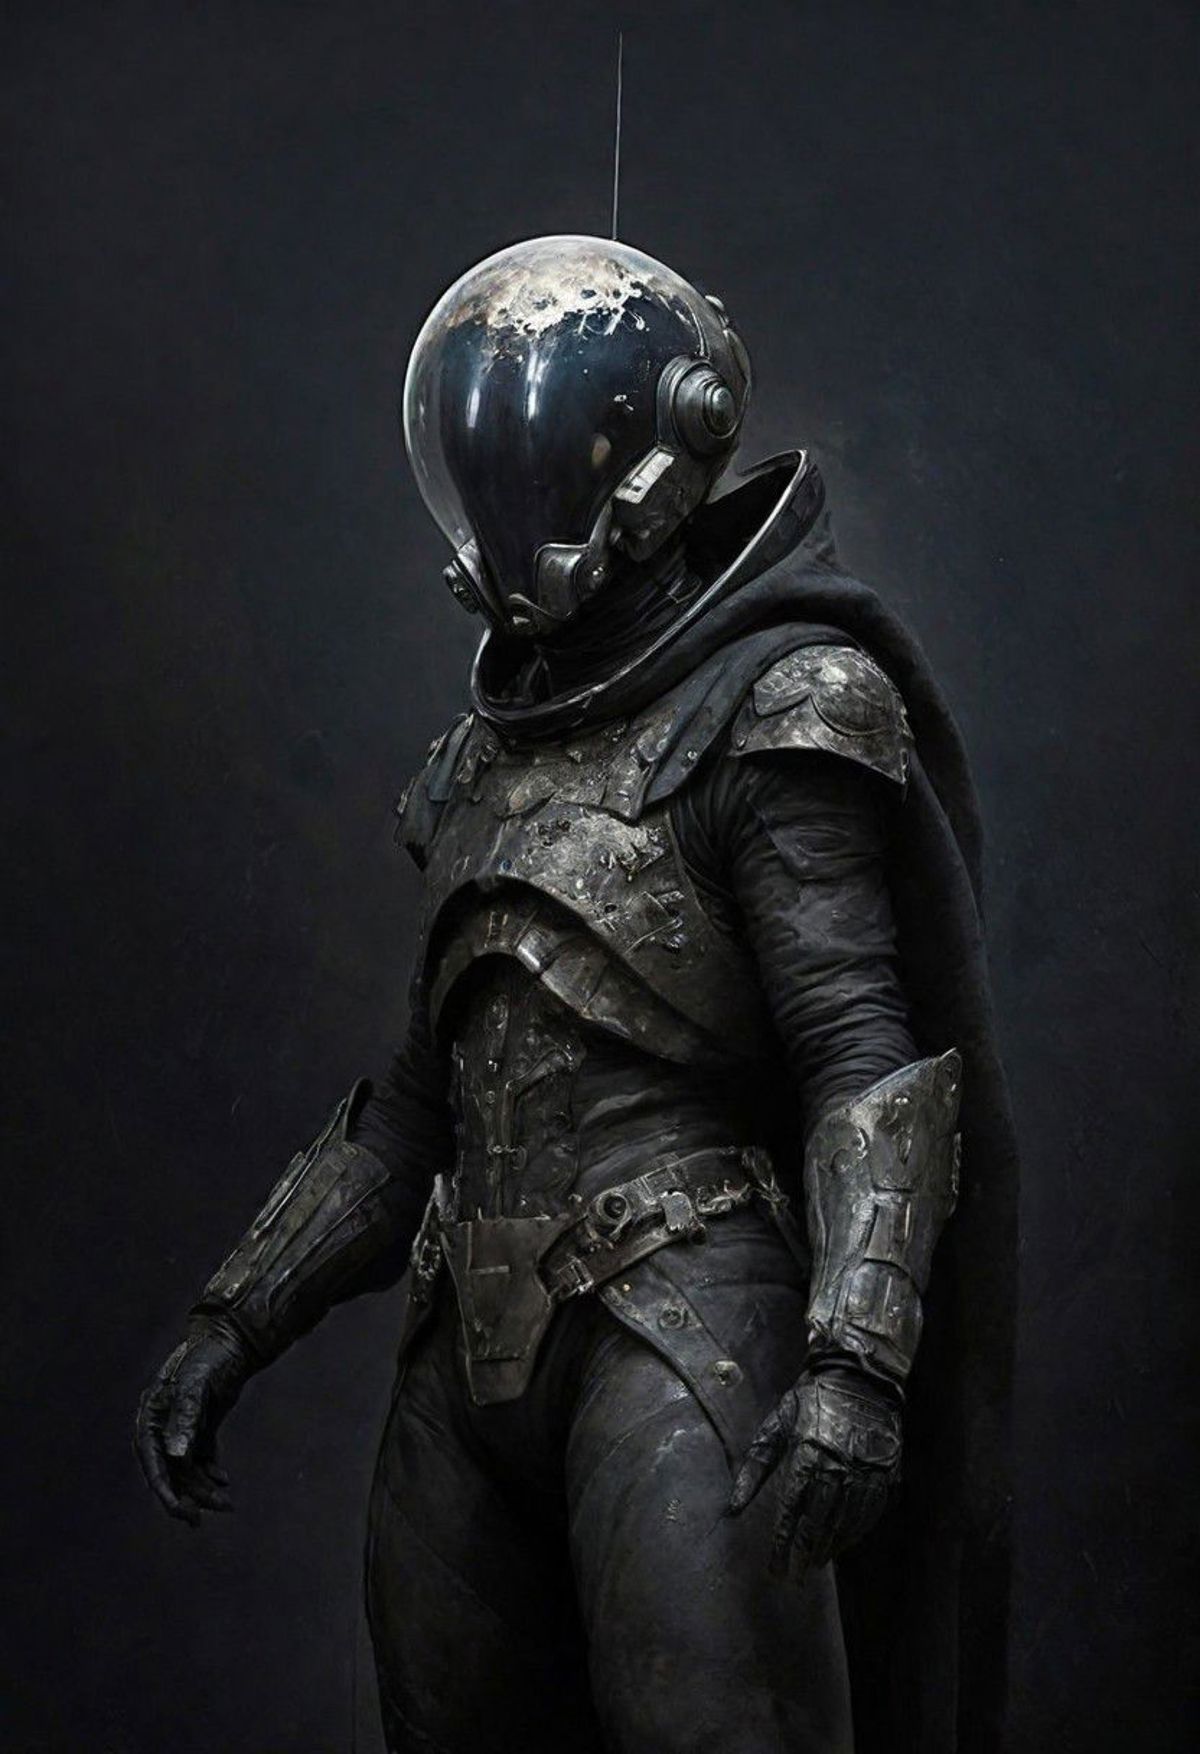 A person in a black suit with a helmet on.